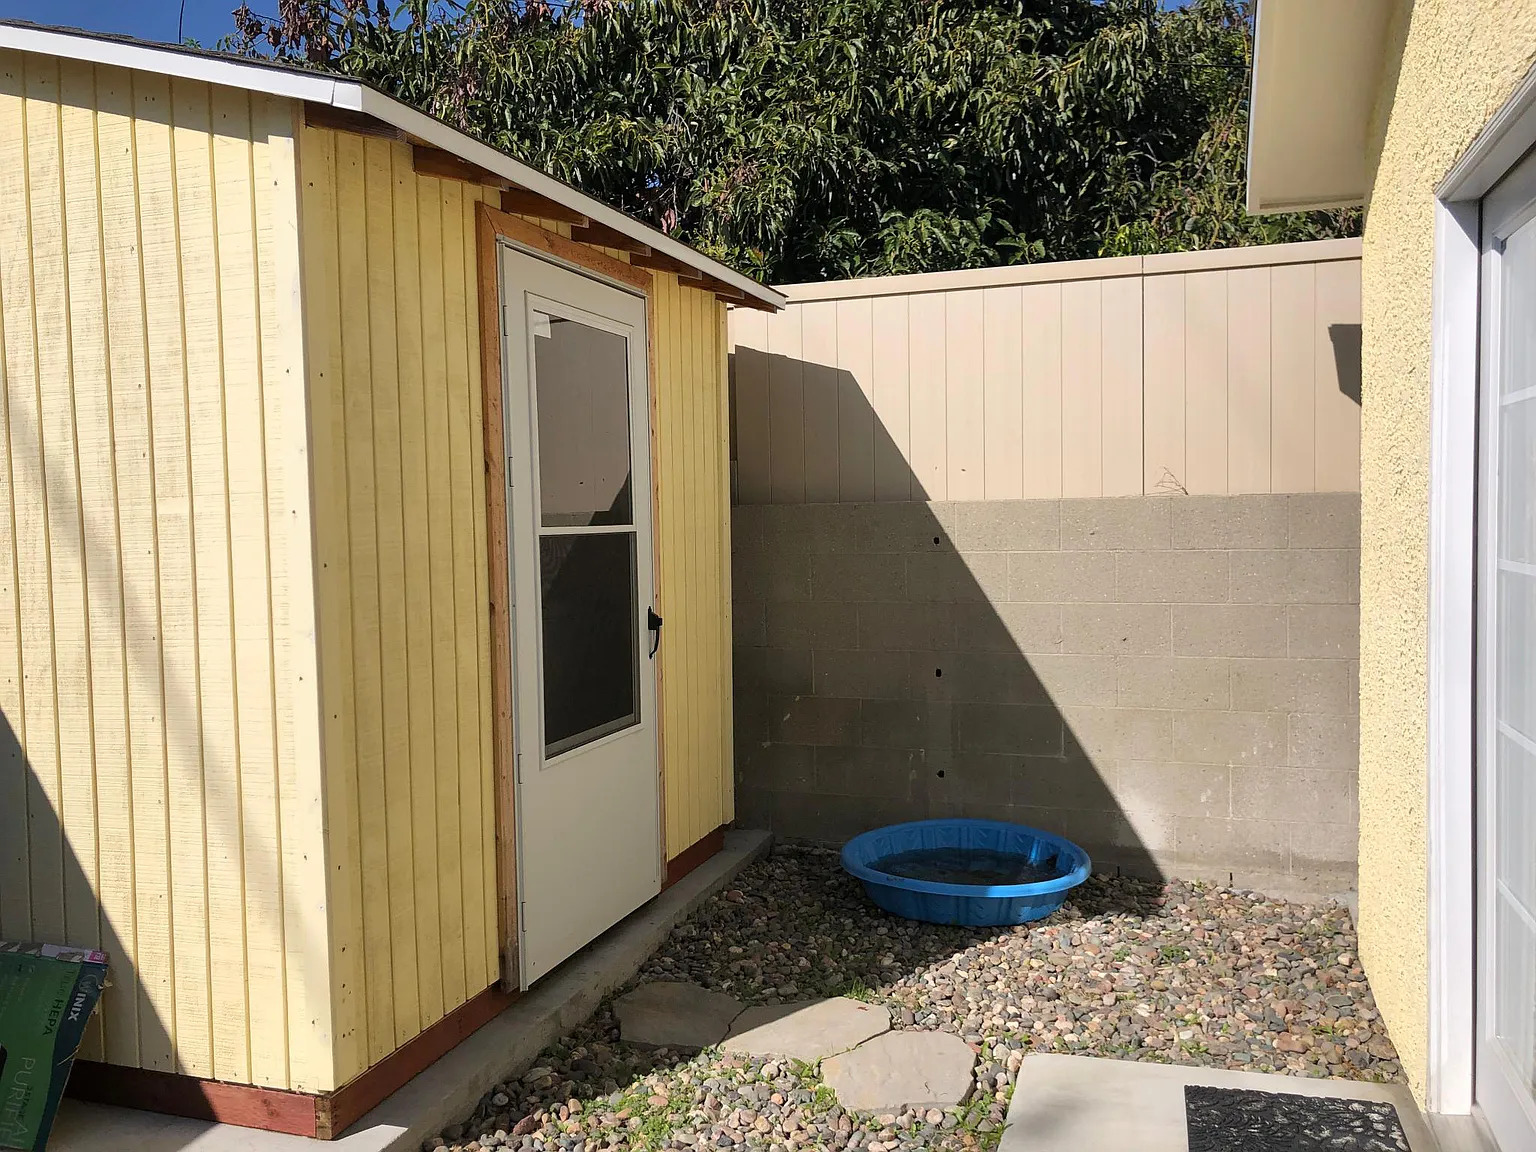 After photo of the storage shed 